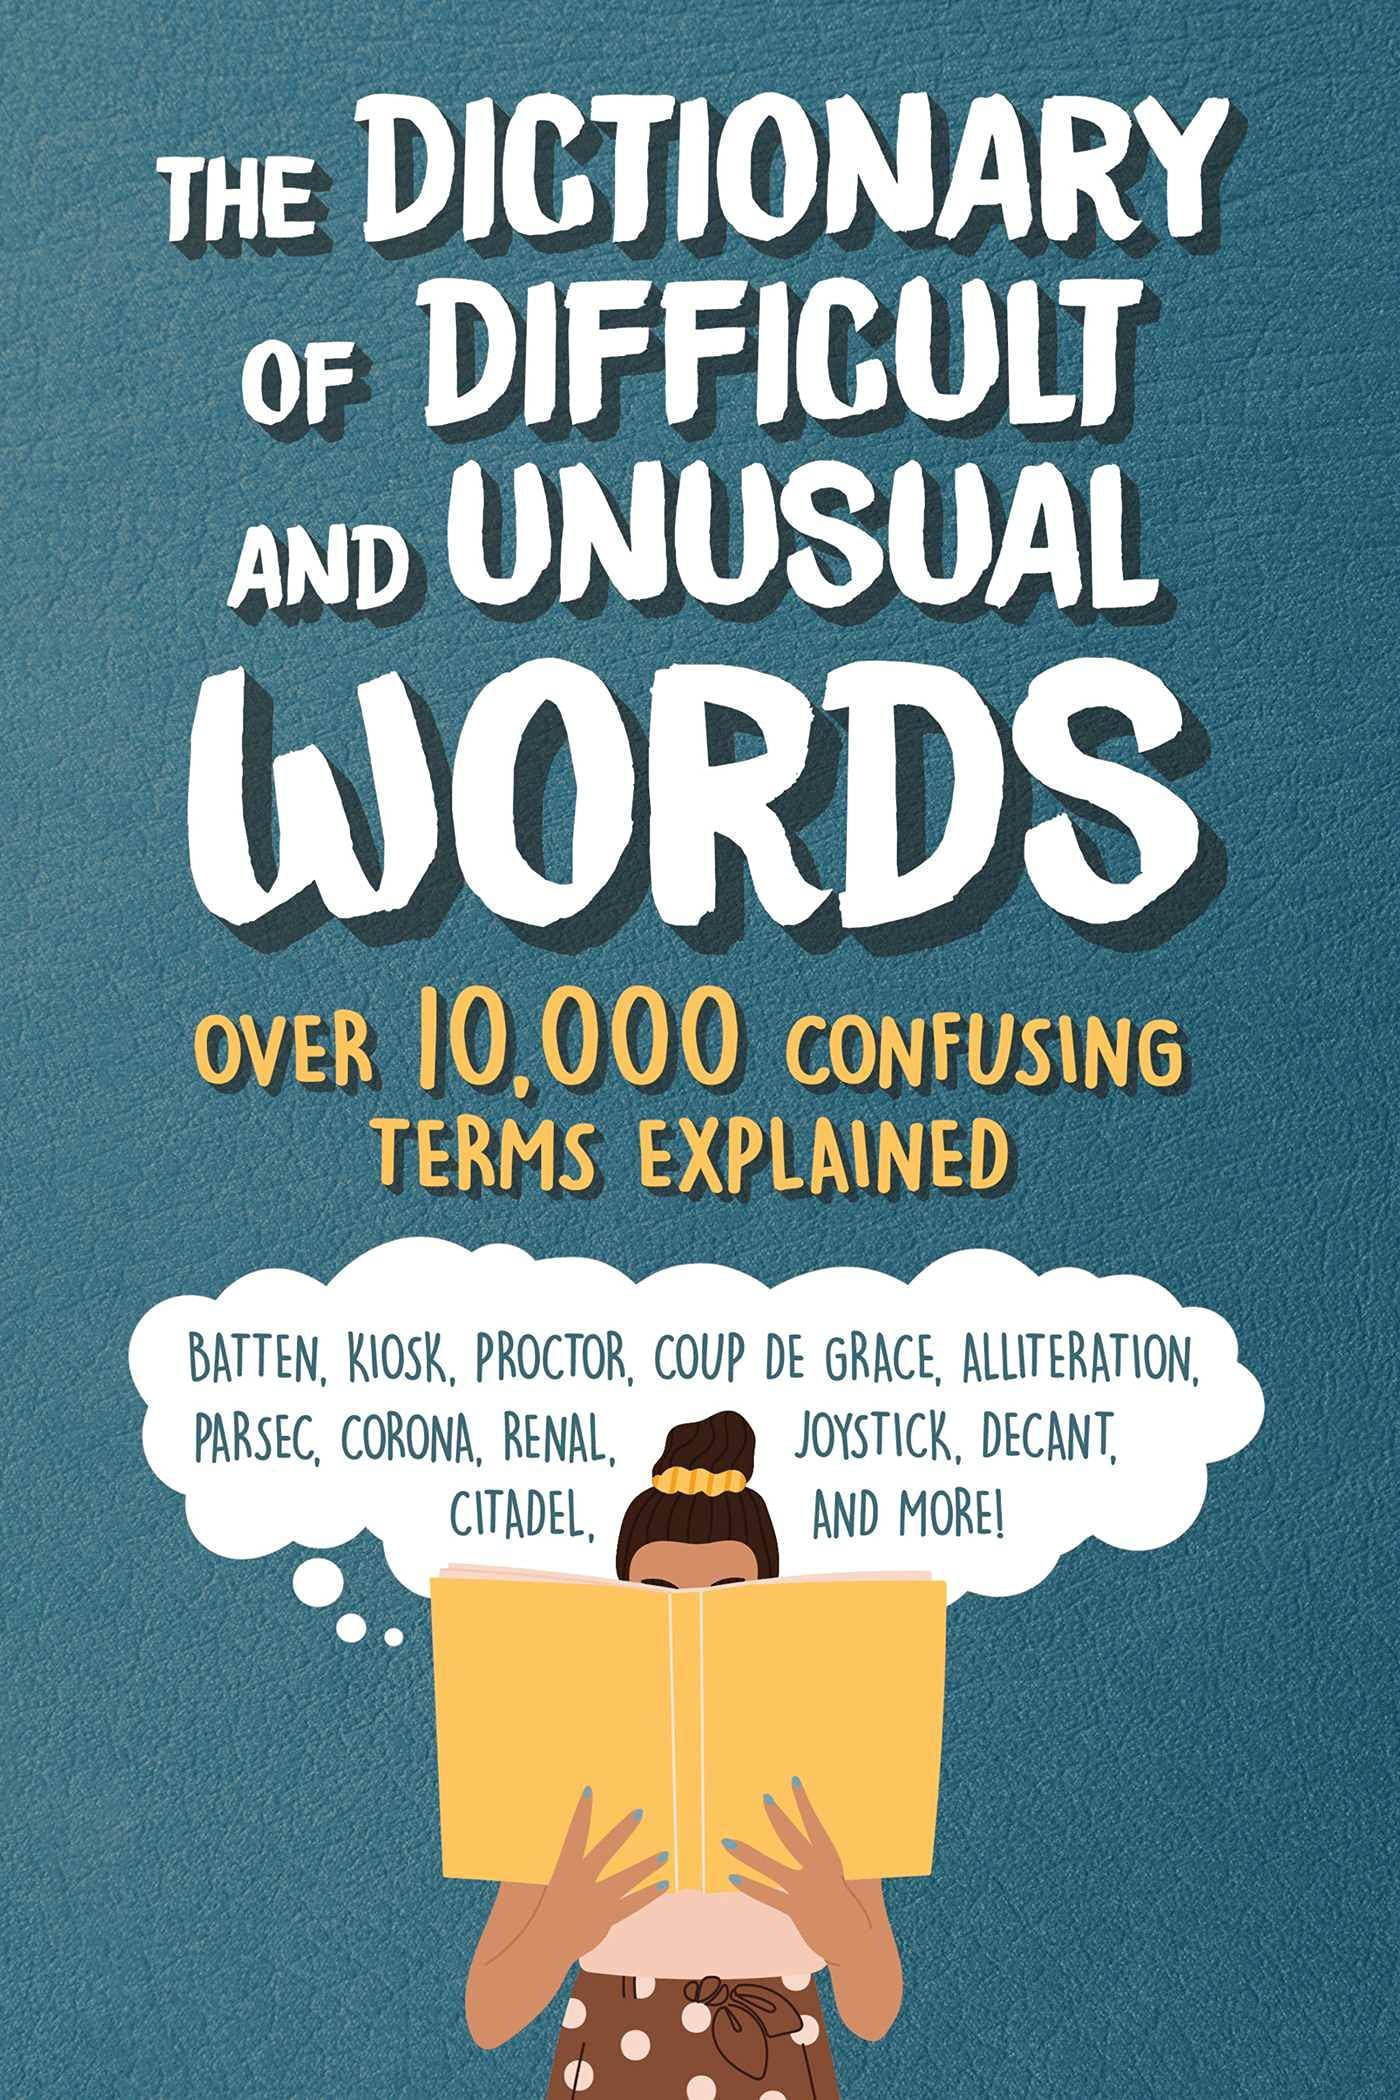 The Dictionary of Difficult and Unusual Words - SureShot Books Publishing LLC